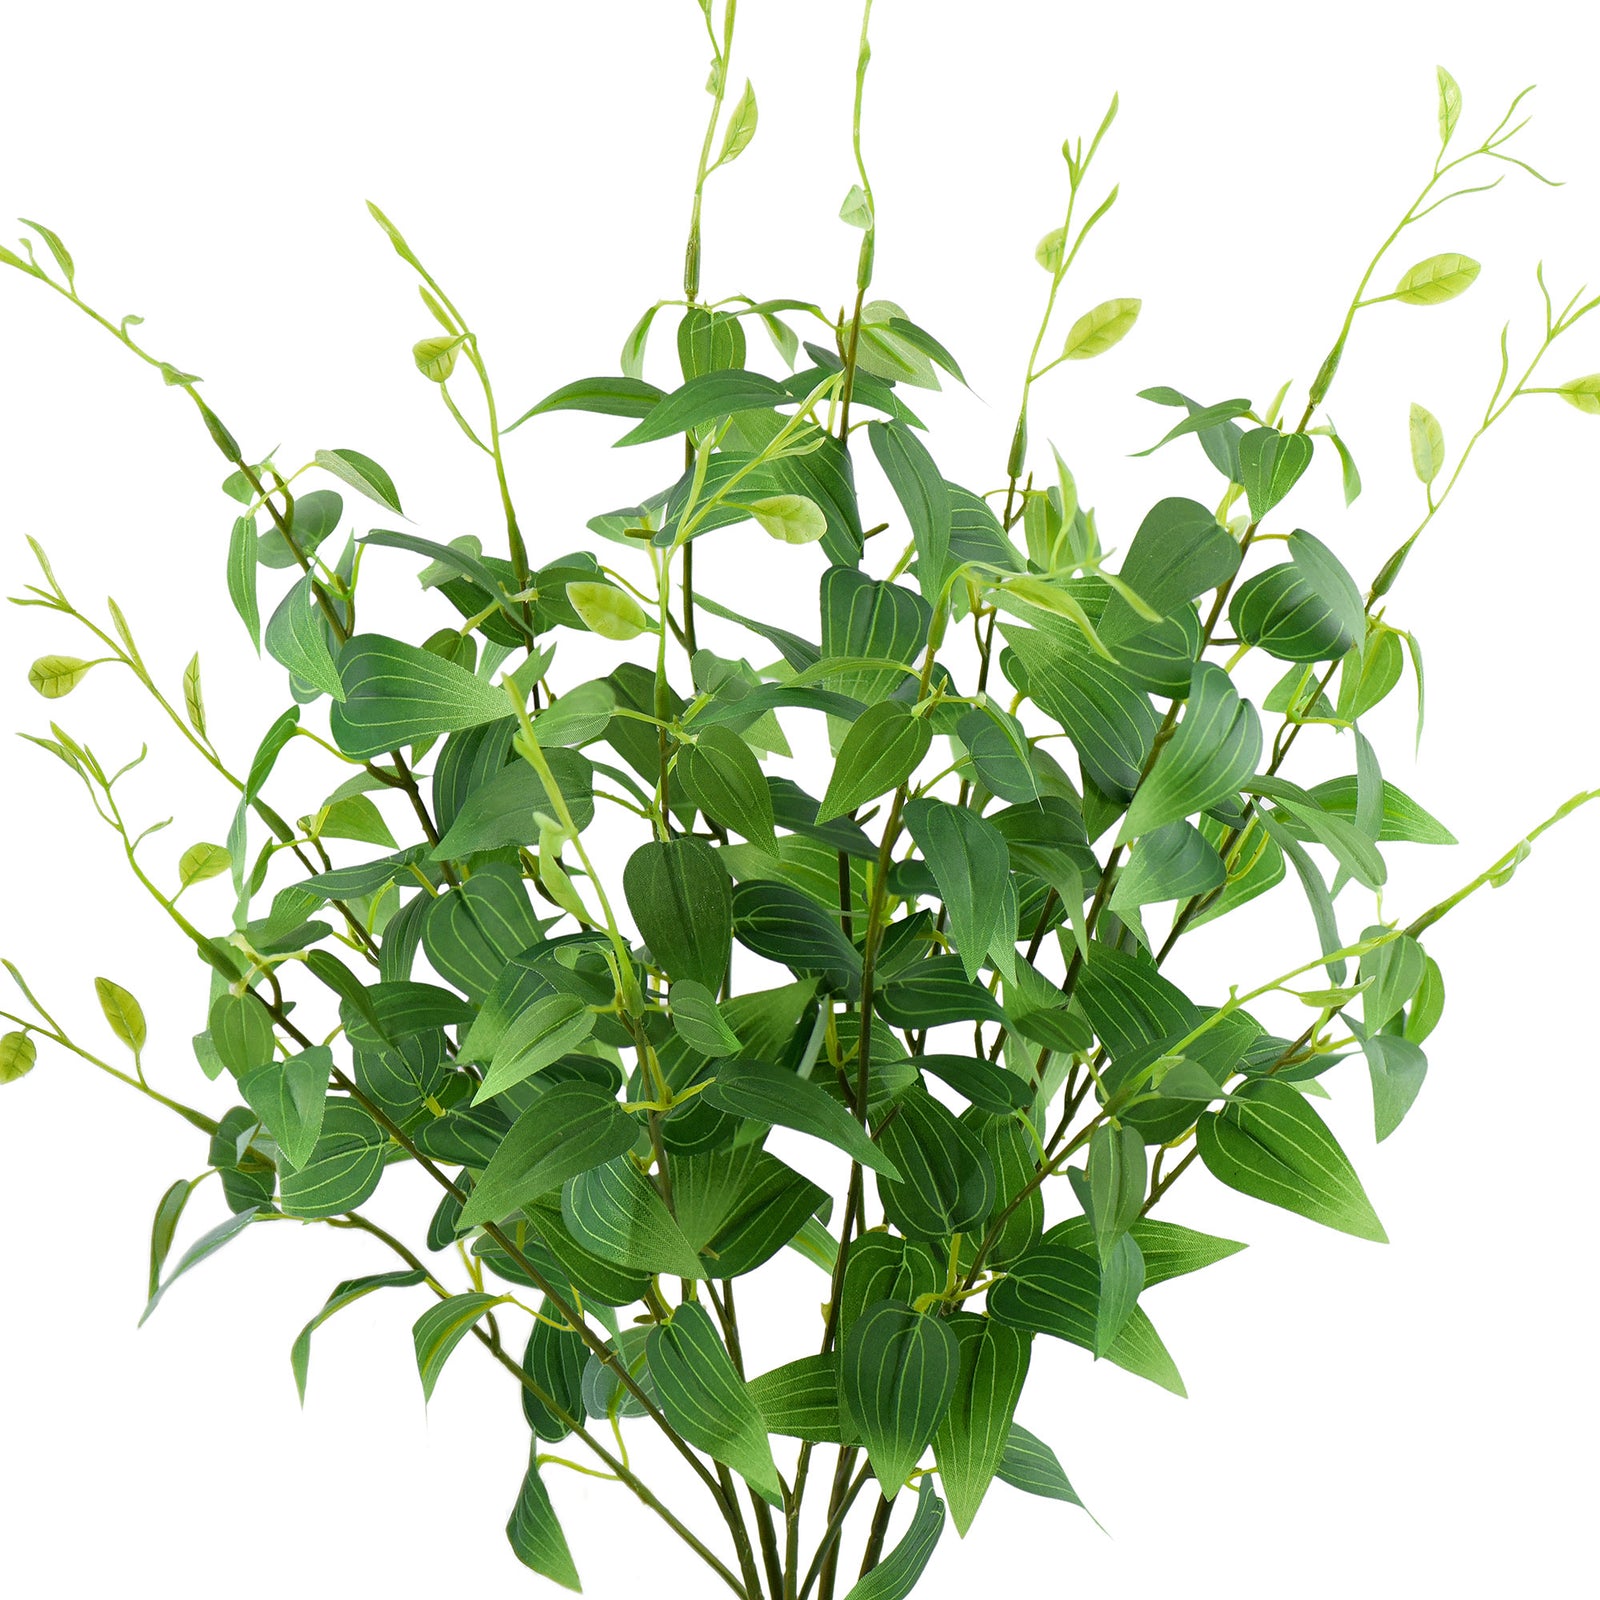 FiveSeasonStuff 6 Bunches of Clematis Leaves for Decorating Bouquets Floral Arrangement Artificial Greenery Fillers